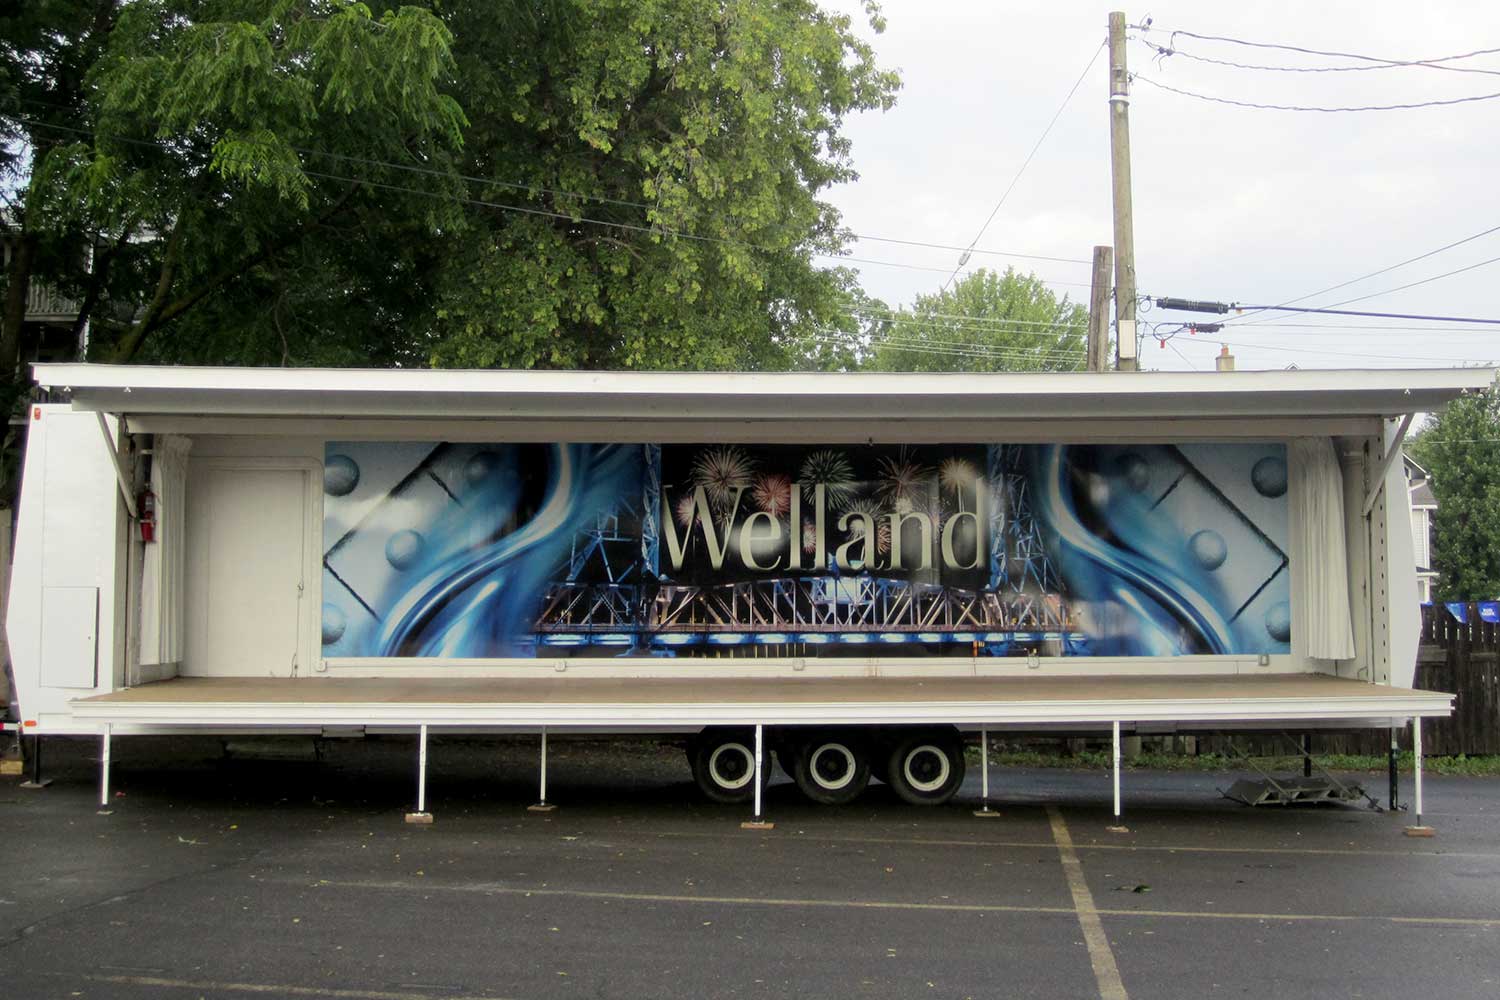 showmobile with mural